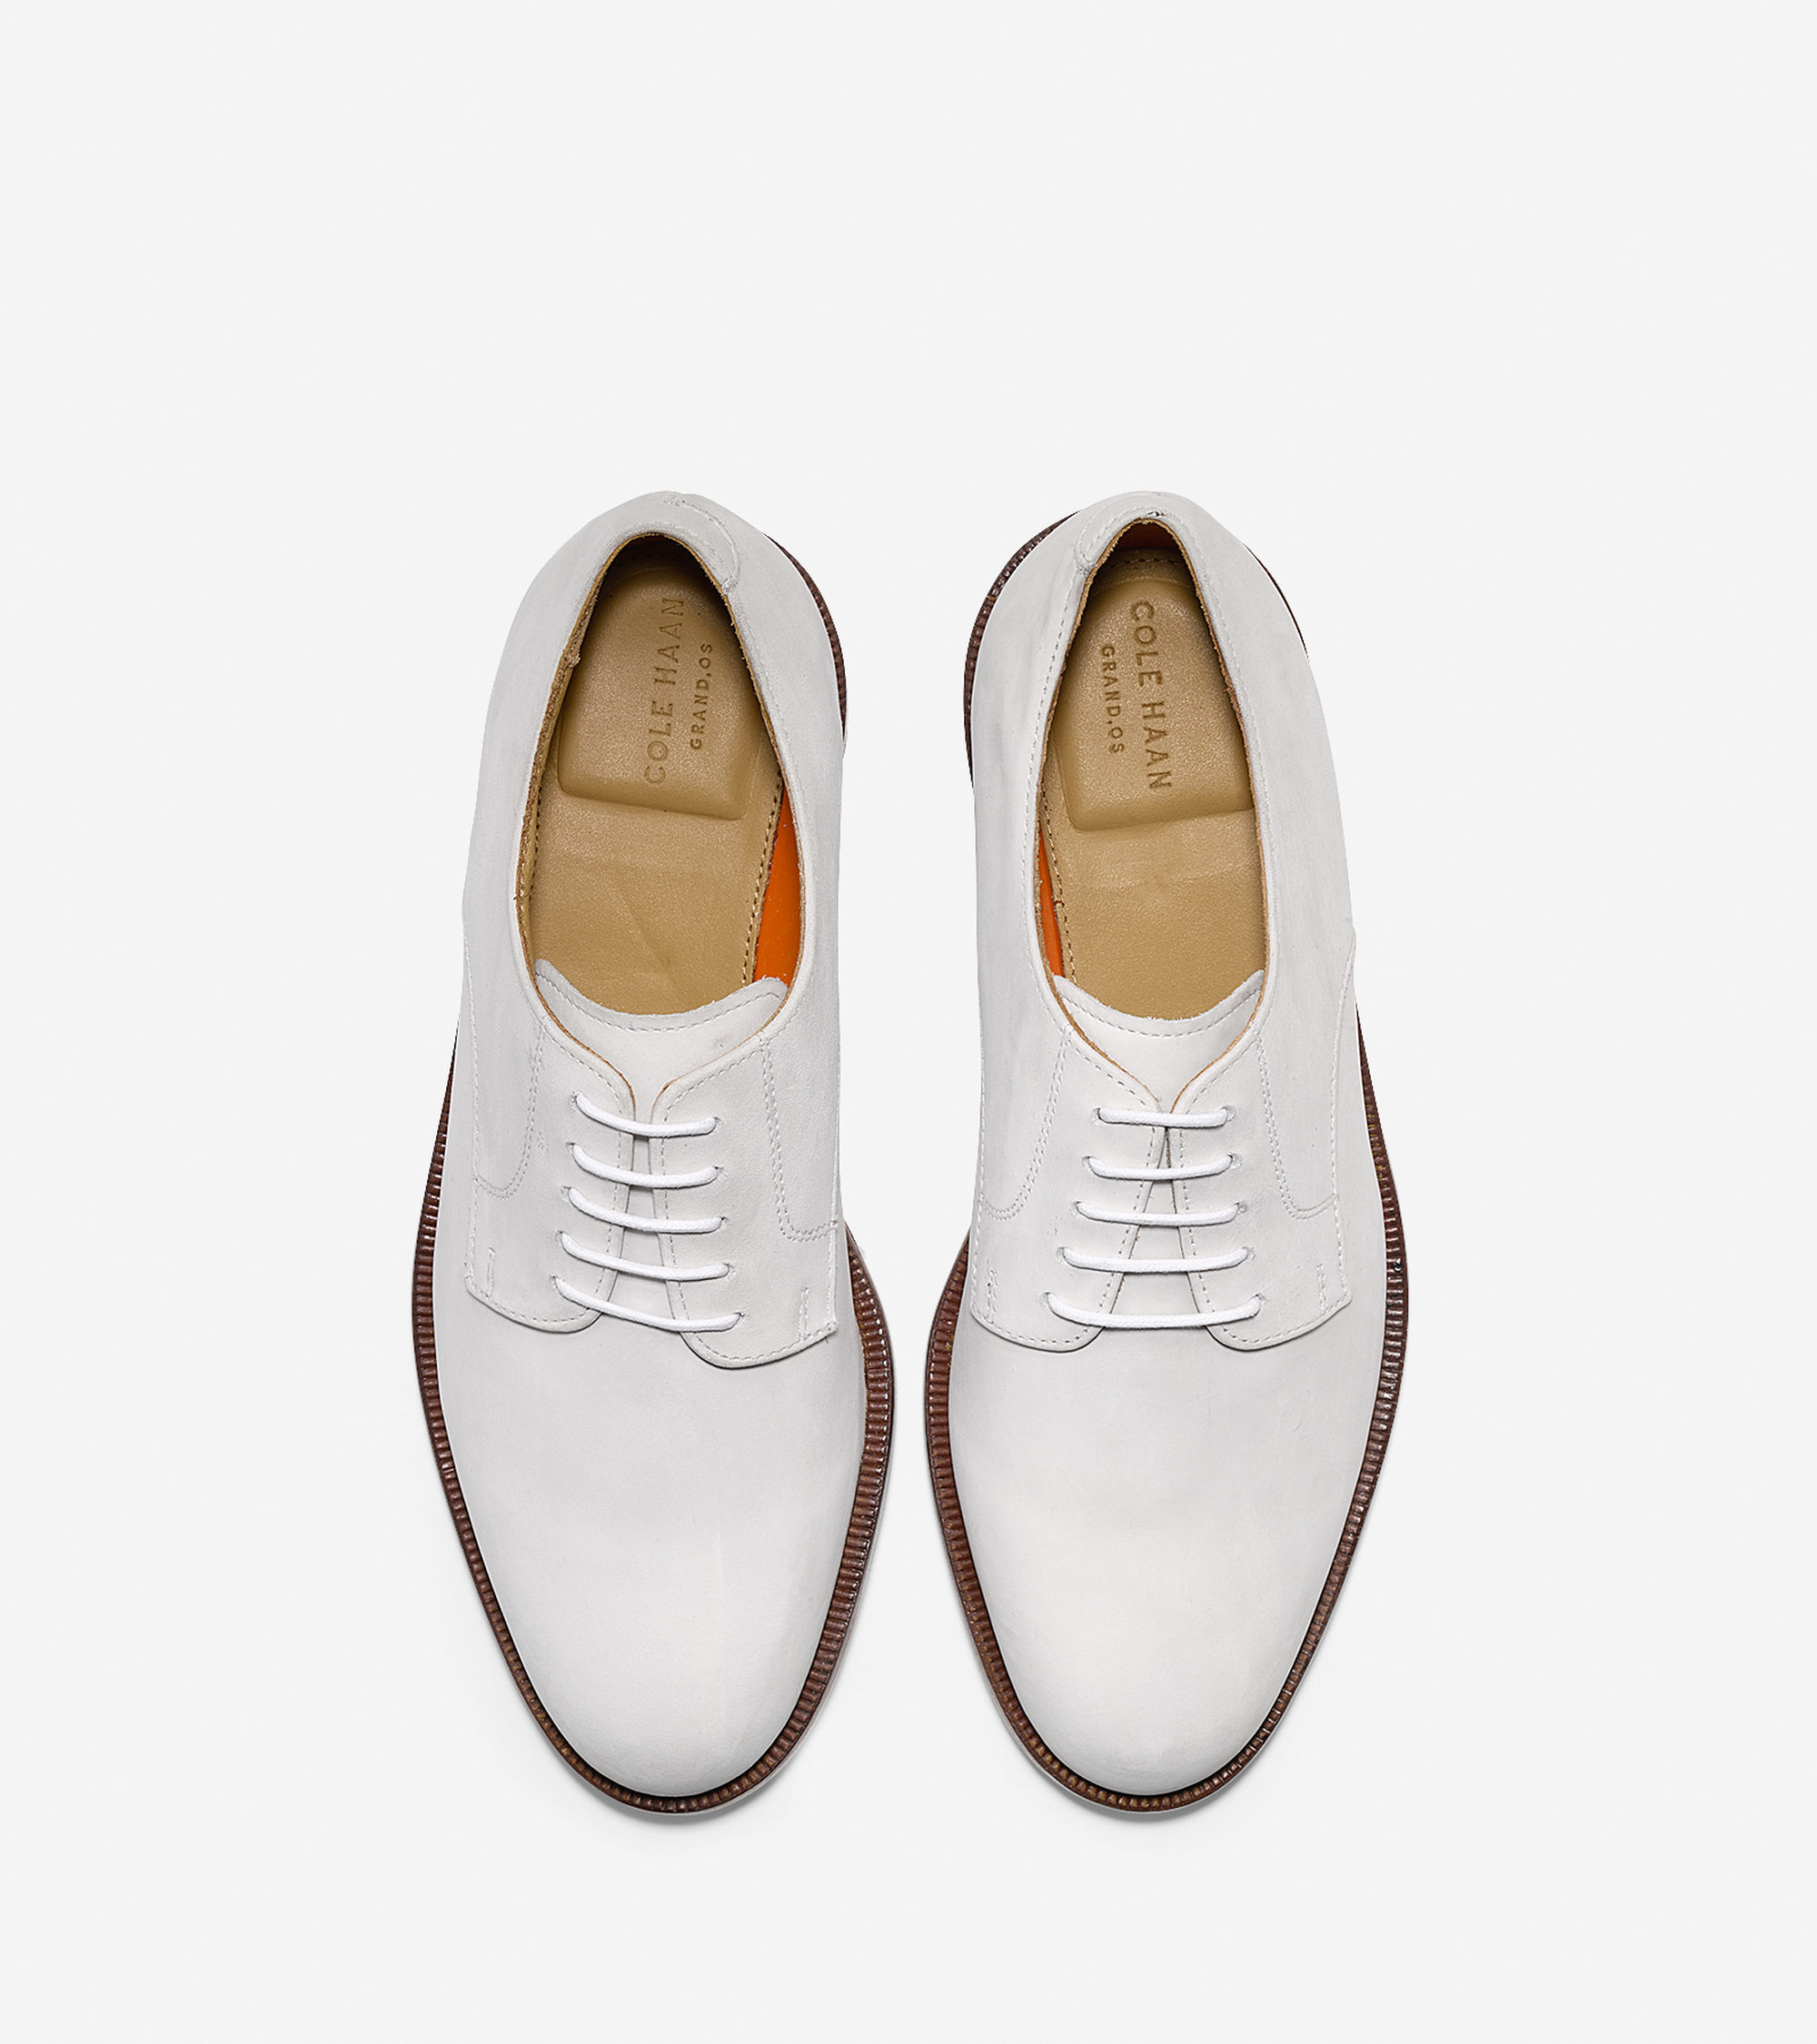 Lyst - Cole Haan Carter Grand Plain Toe Oxford in White for Men